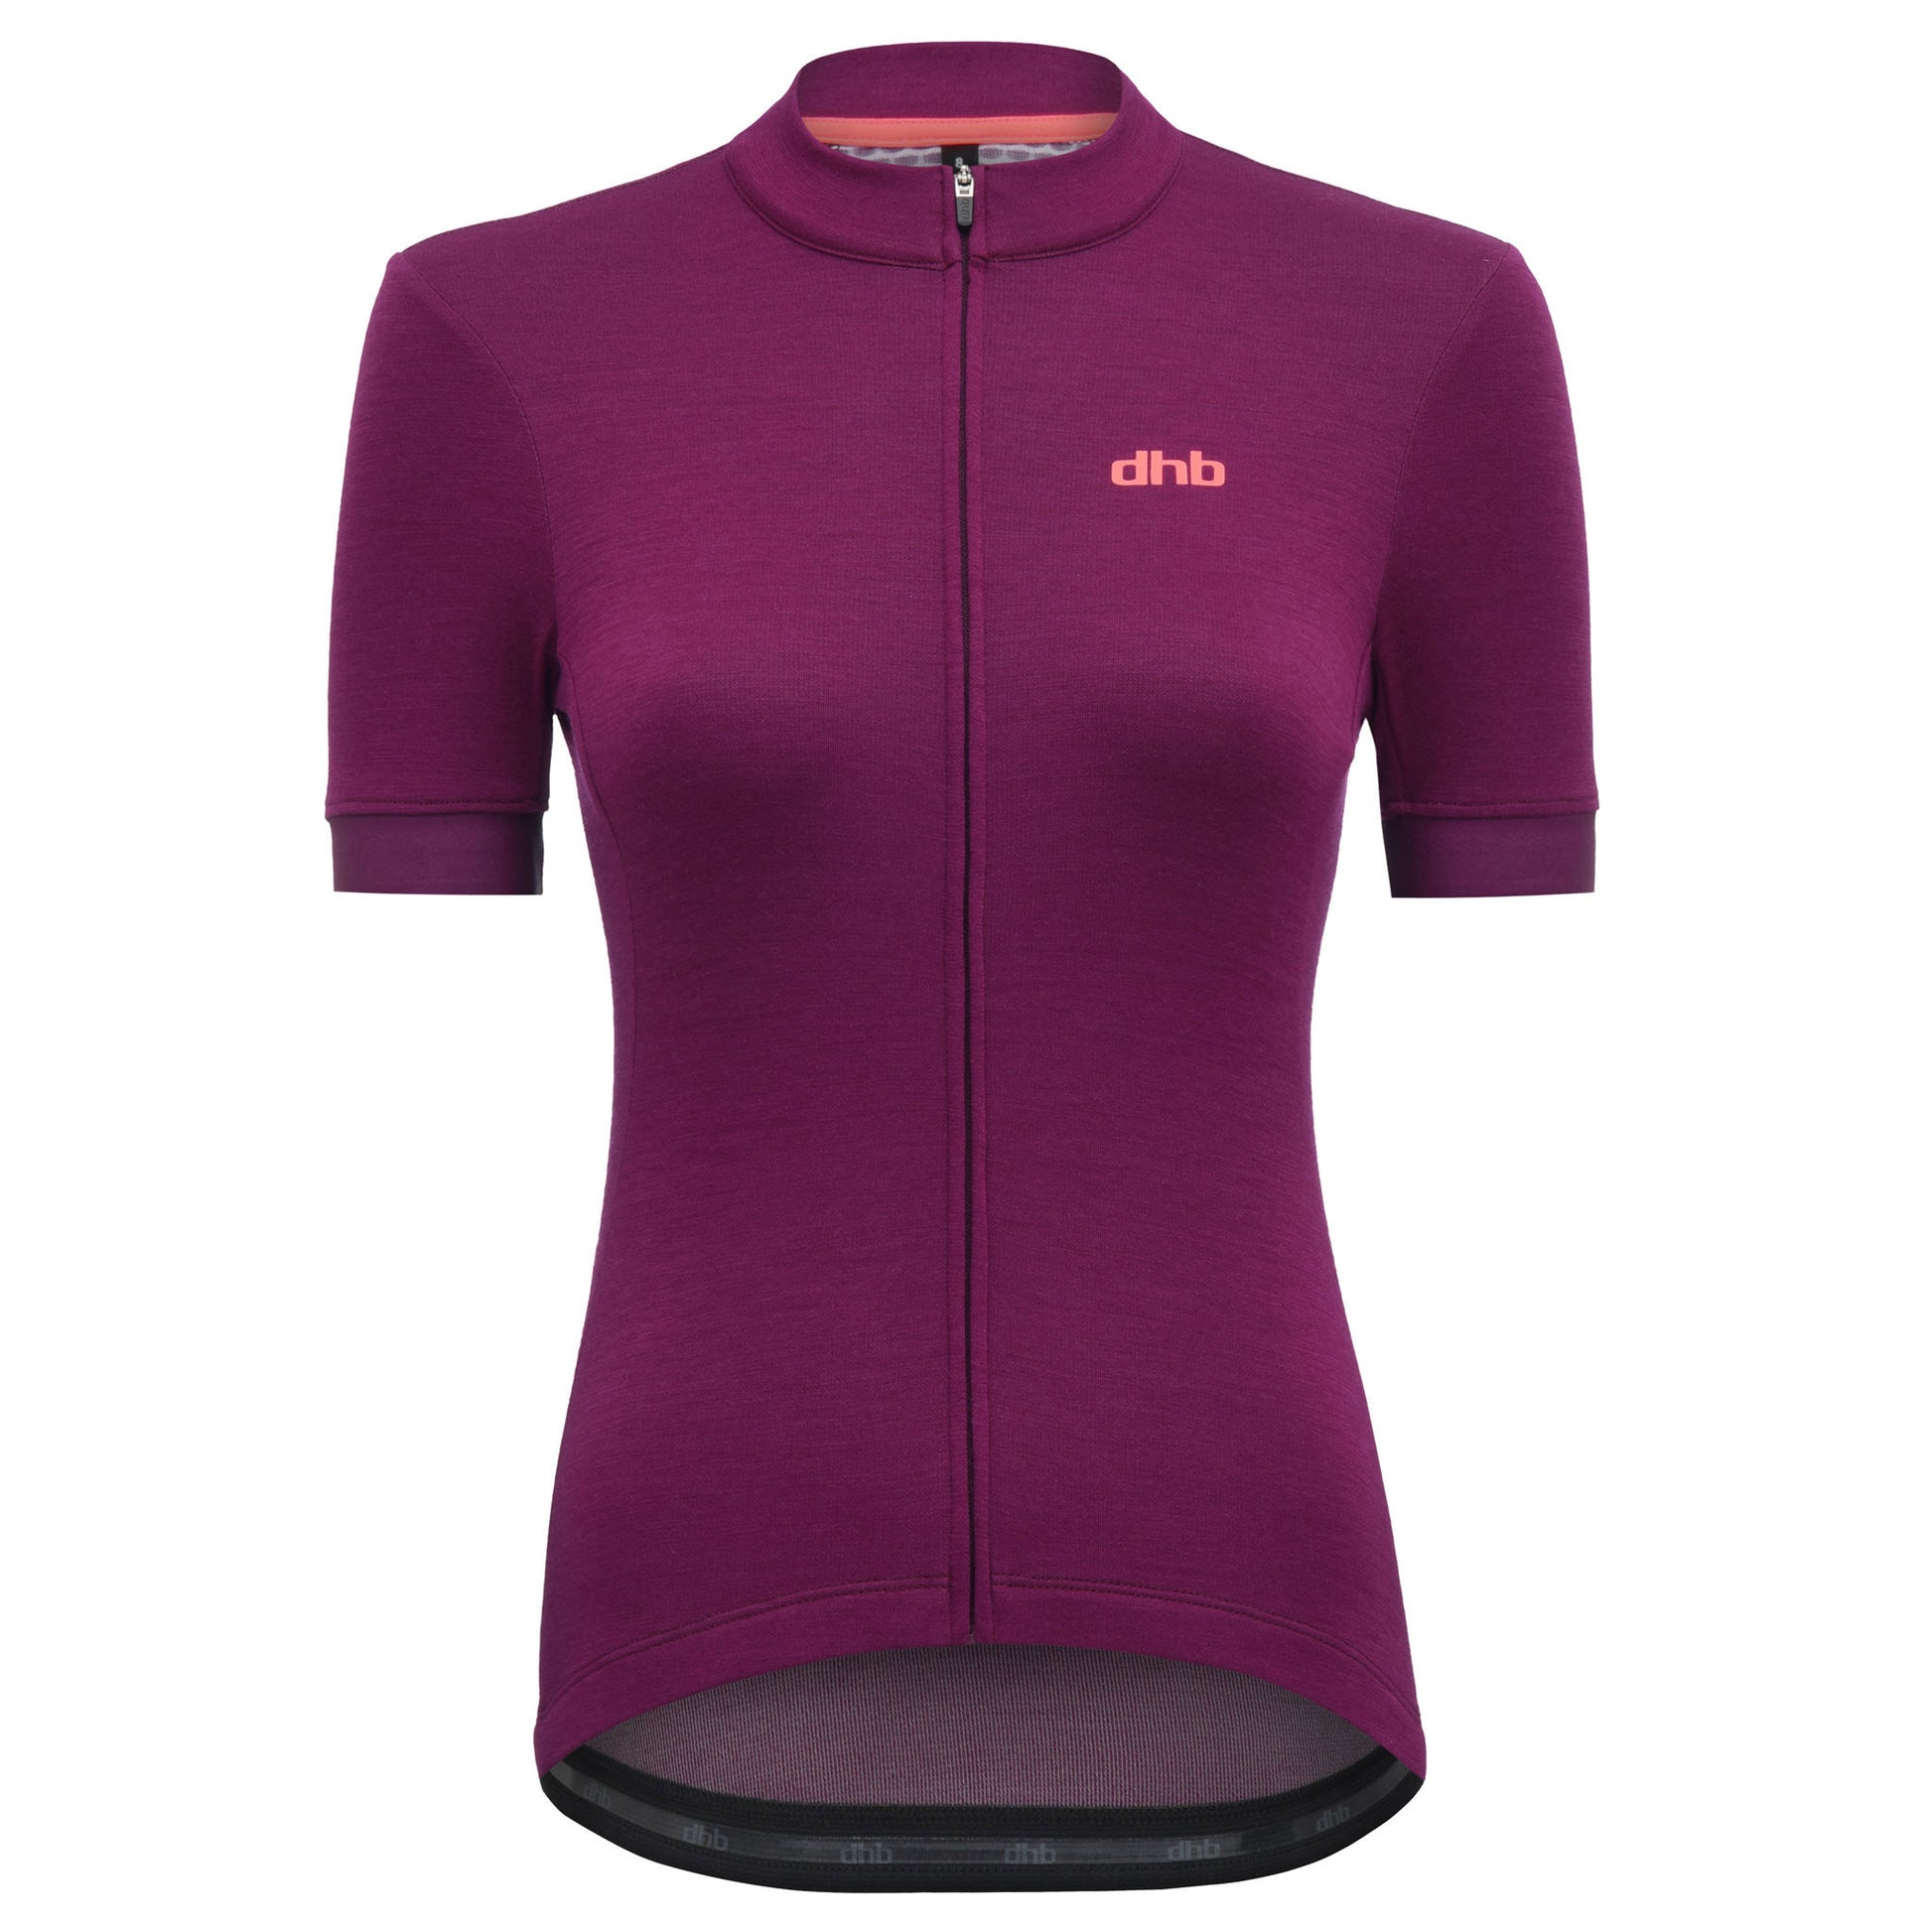 DHB Womens Classic Merino Short Sleeve Jersey Raspberry buy online at Woolys Wheels with free delivery Australia-Wide